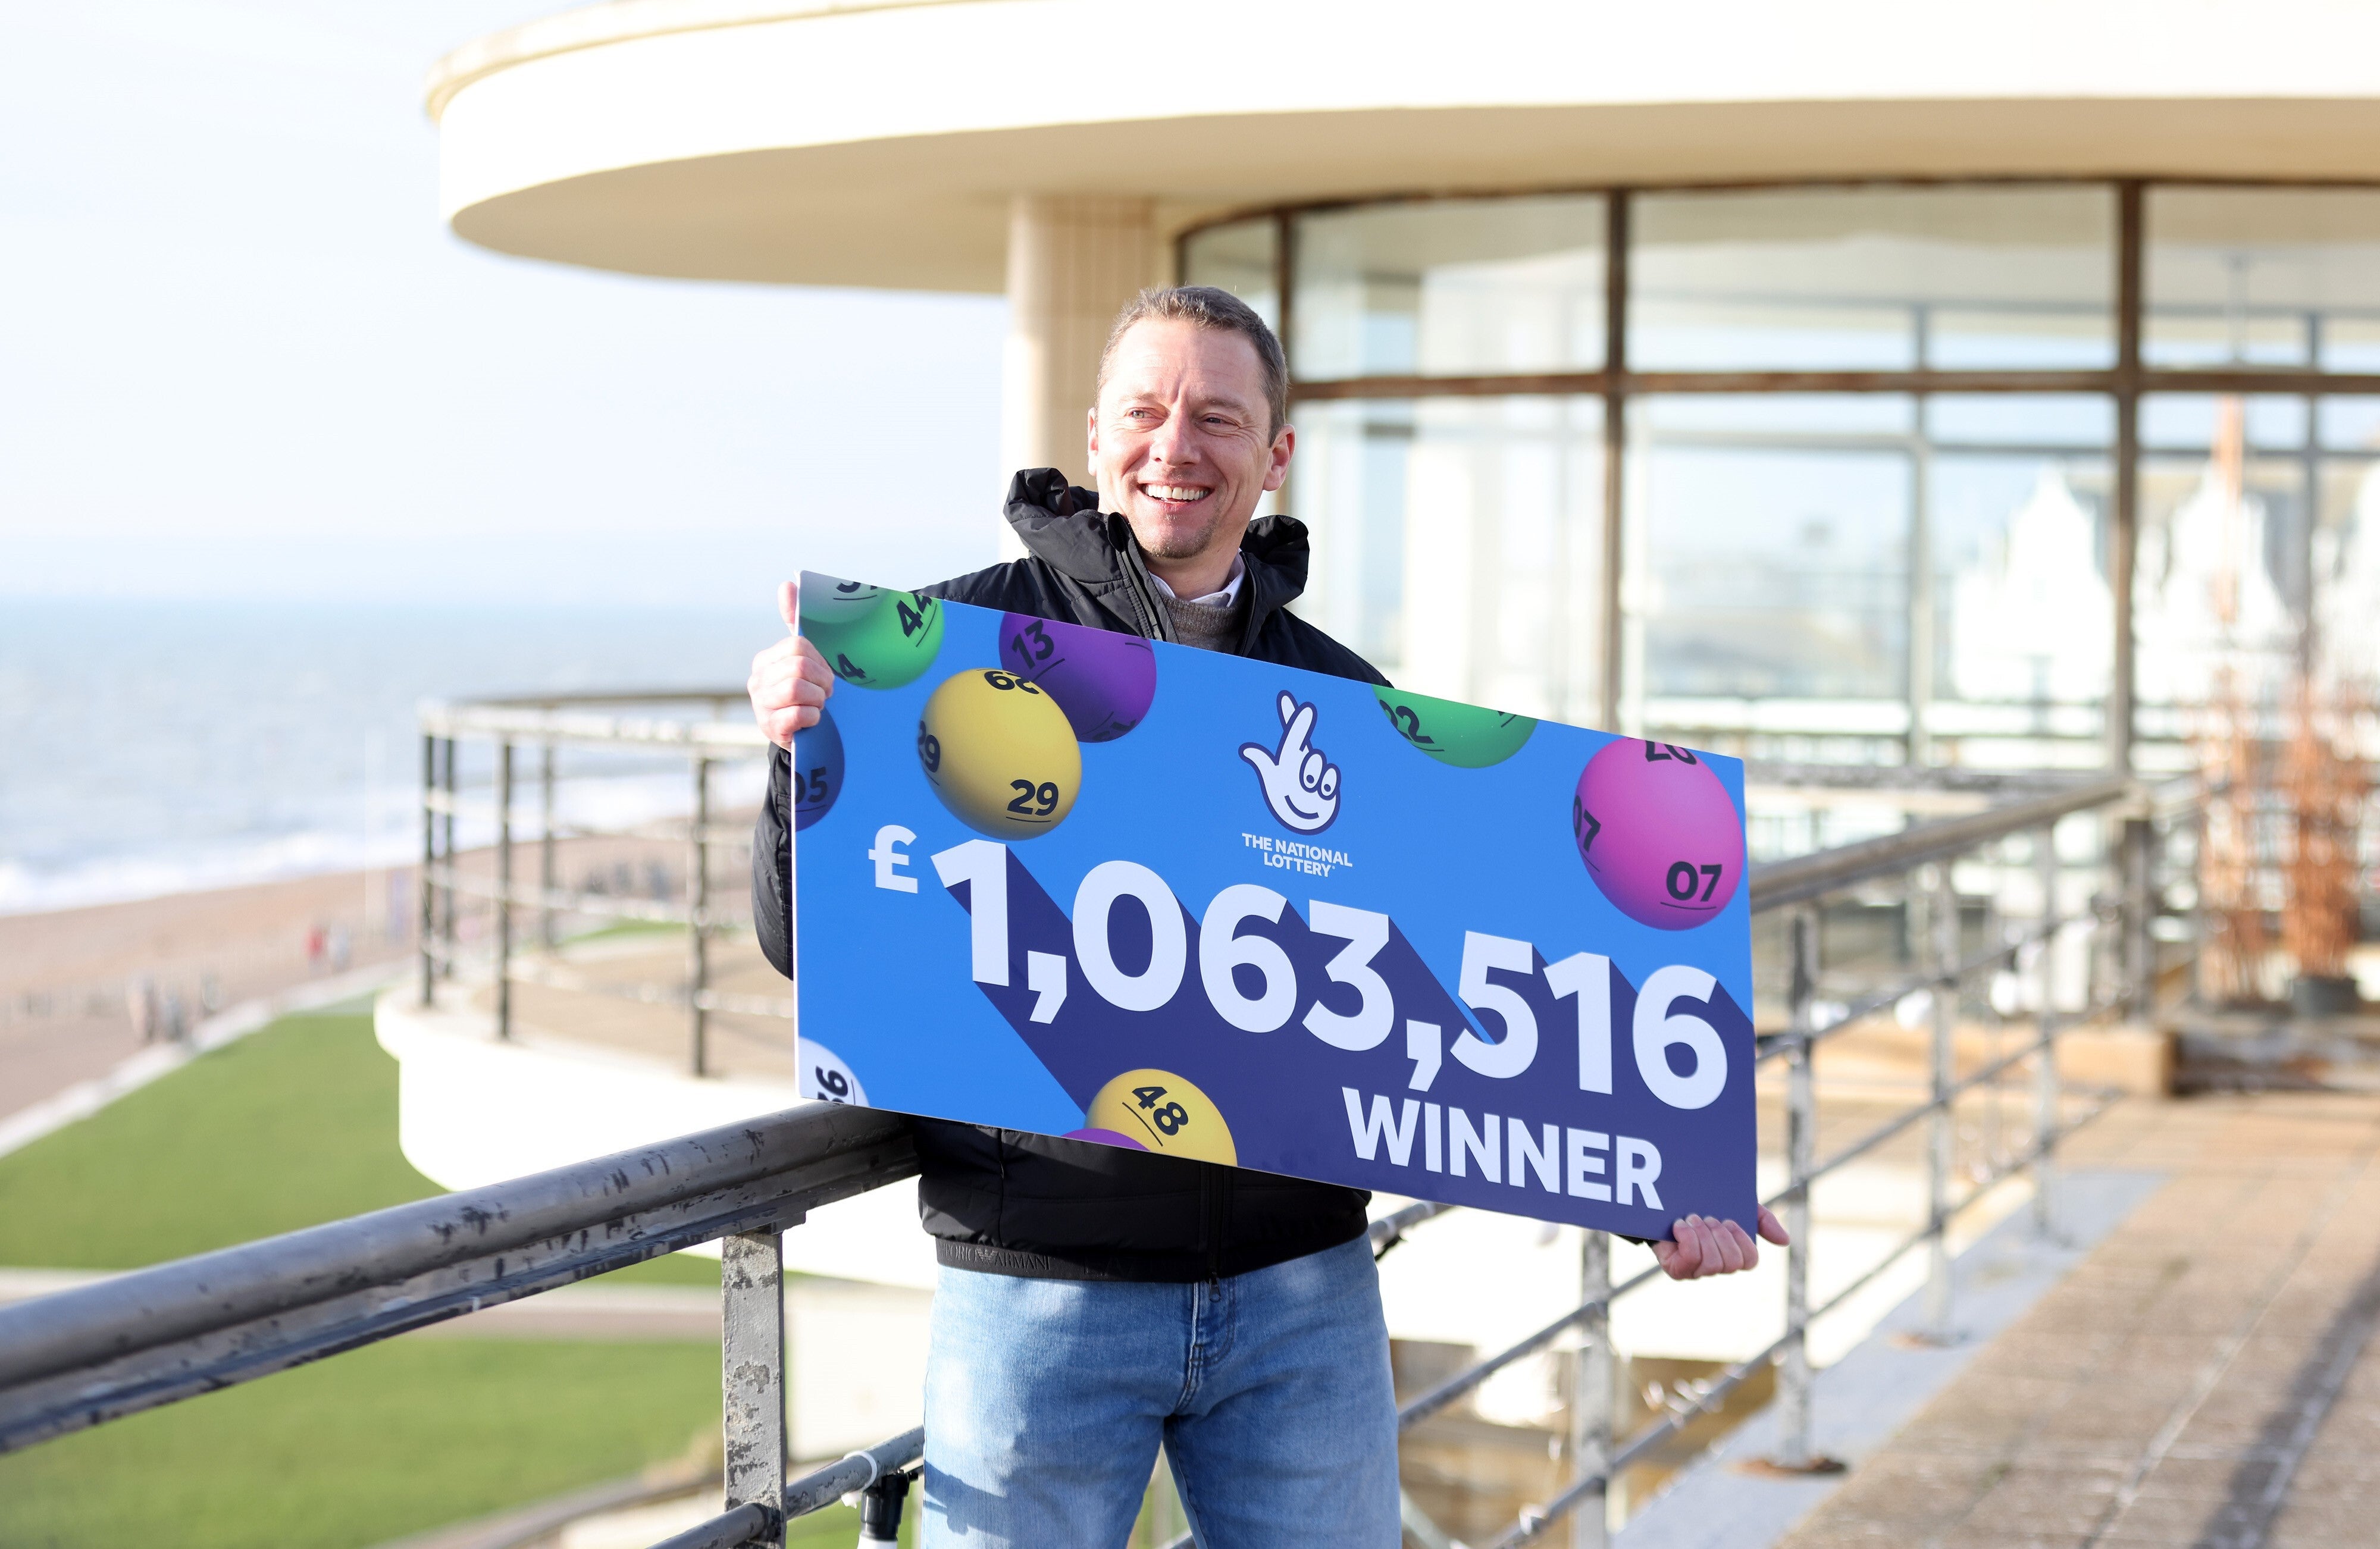 Paul McDonald found out he had won £1m on the National Lottery when he checked his emails on Sunday afternoon (The National Lottery/PA)